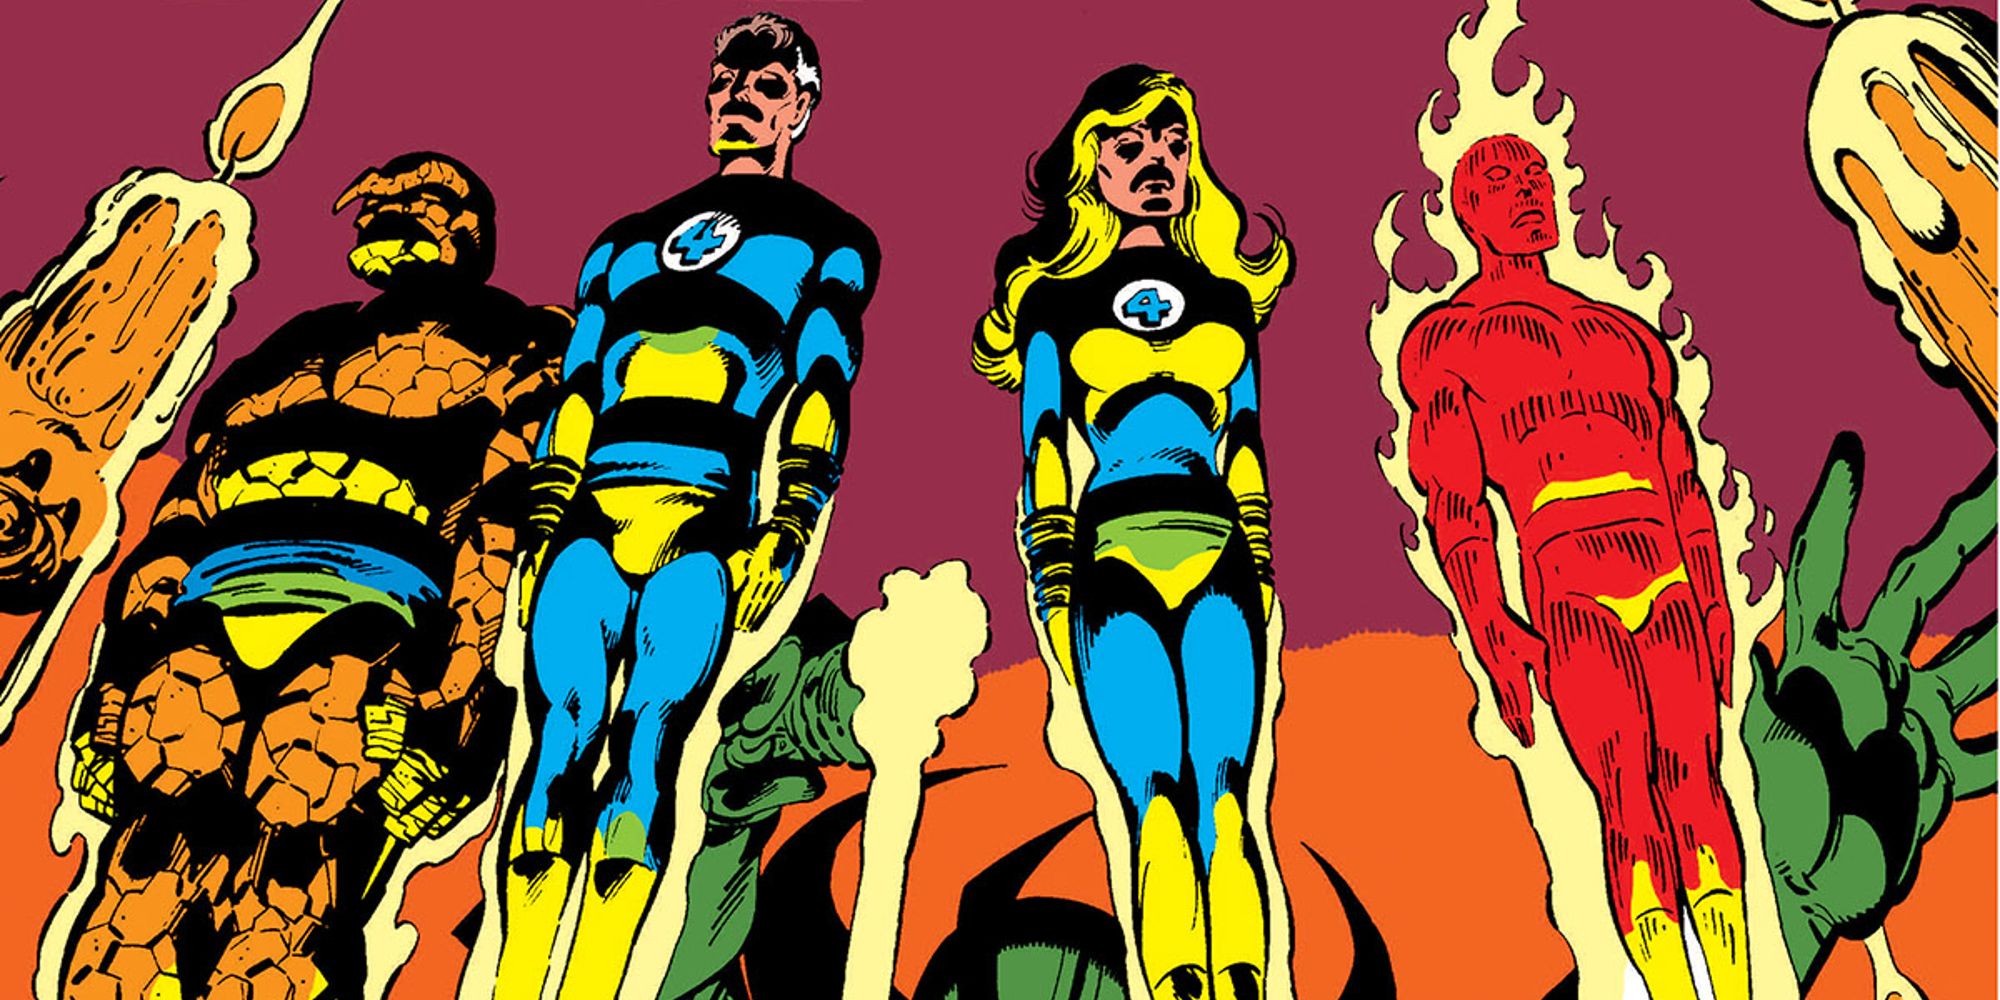 The Fantastic Four being held in the flames of Diablo in John Byrne's Fantastic Four #232